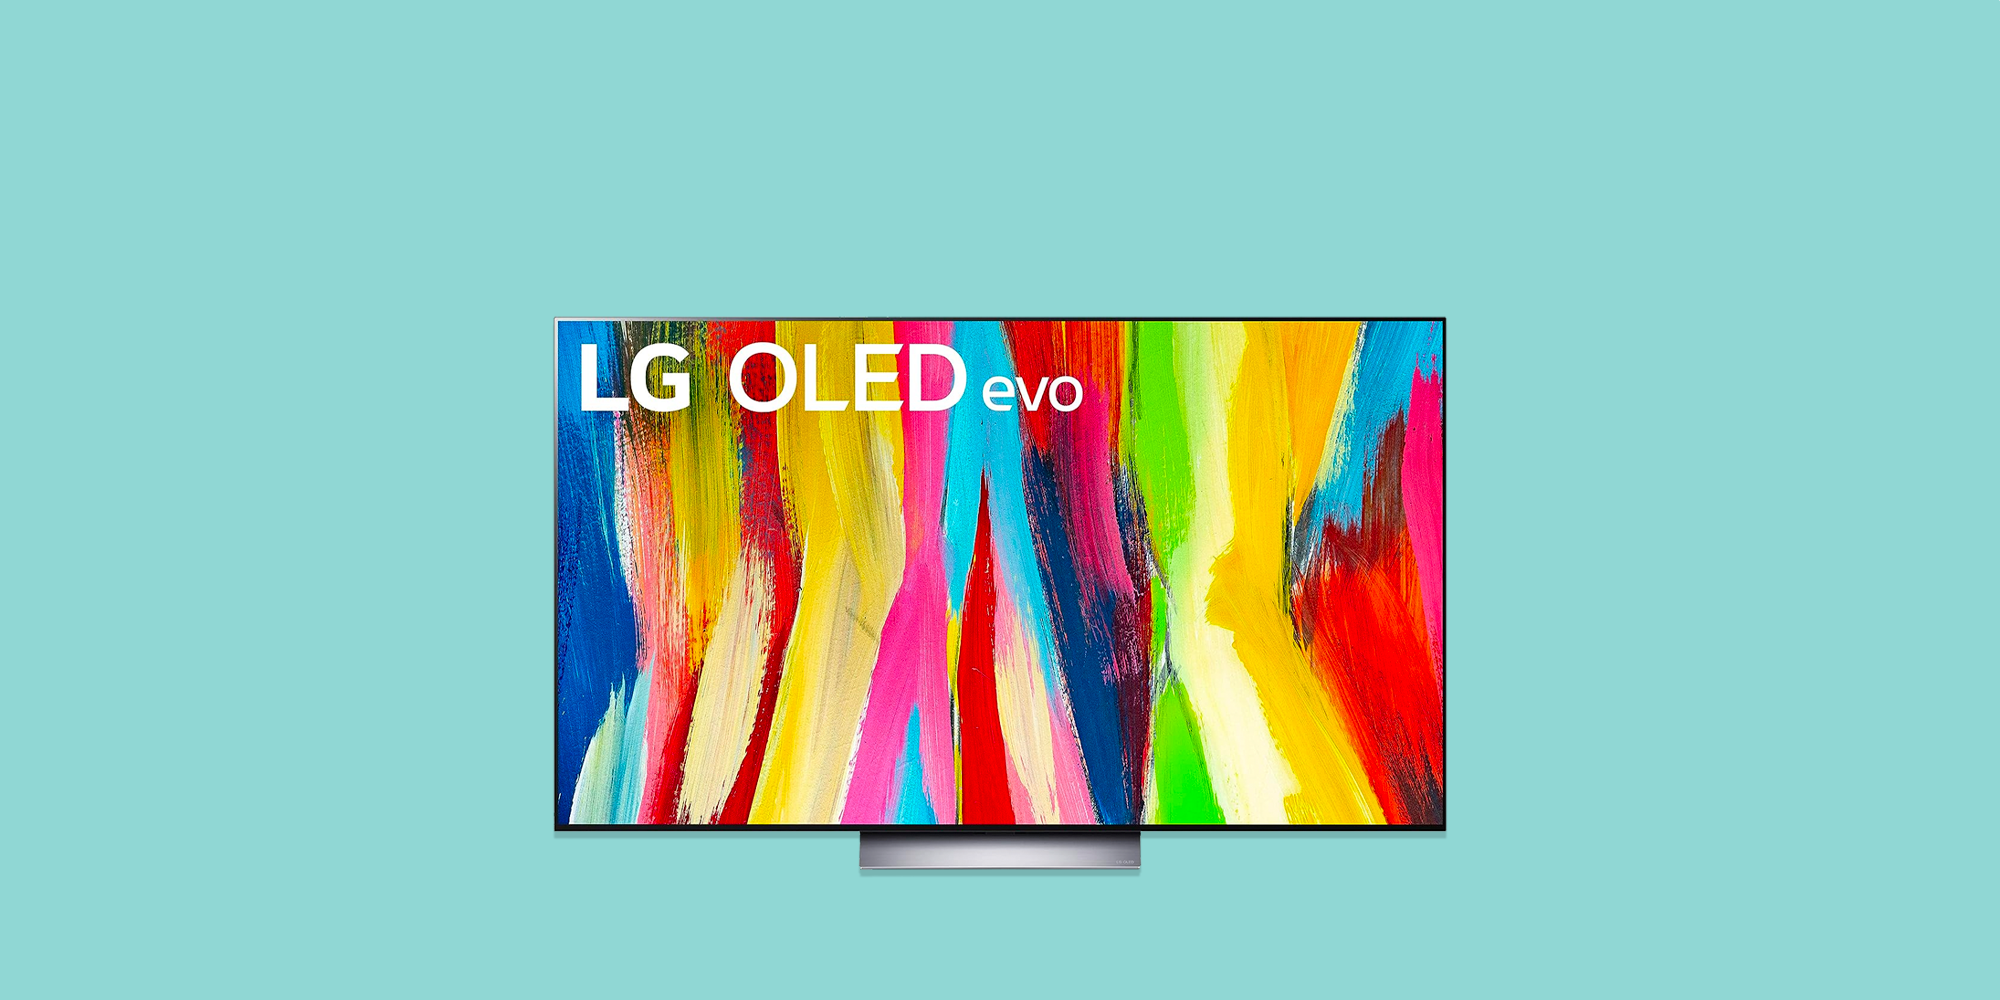 LG C4 OLED TV hands-on review: What's new with LG's top-selling OLED